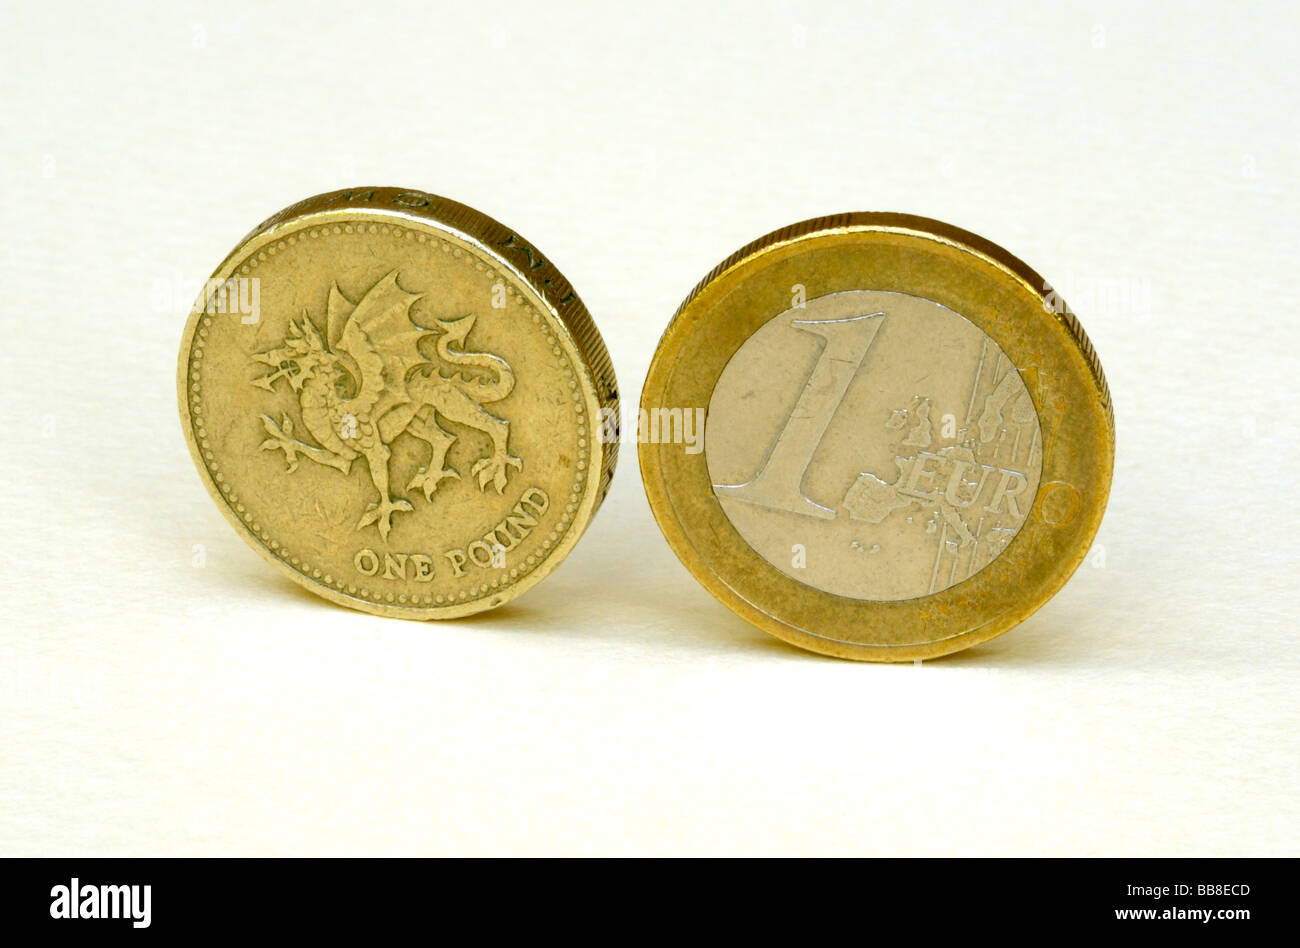 Great Britain UK Pound Coin and Europe Euro Coin Stock Photo